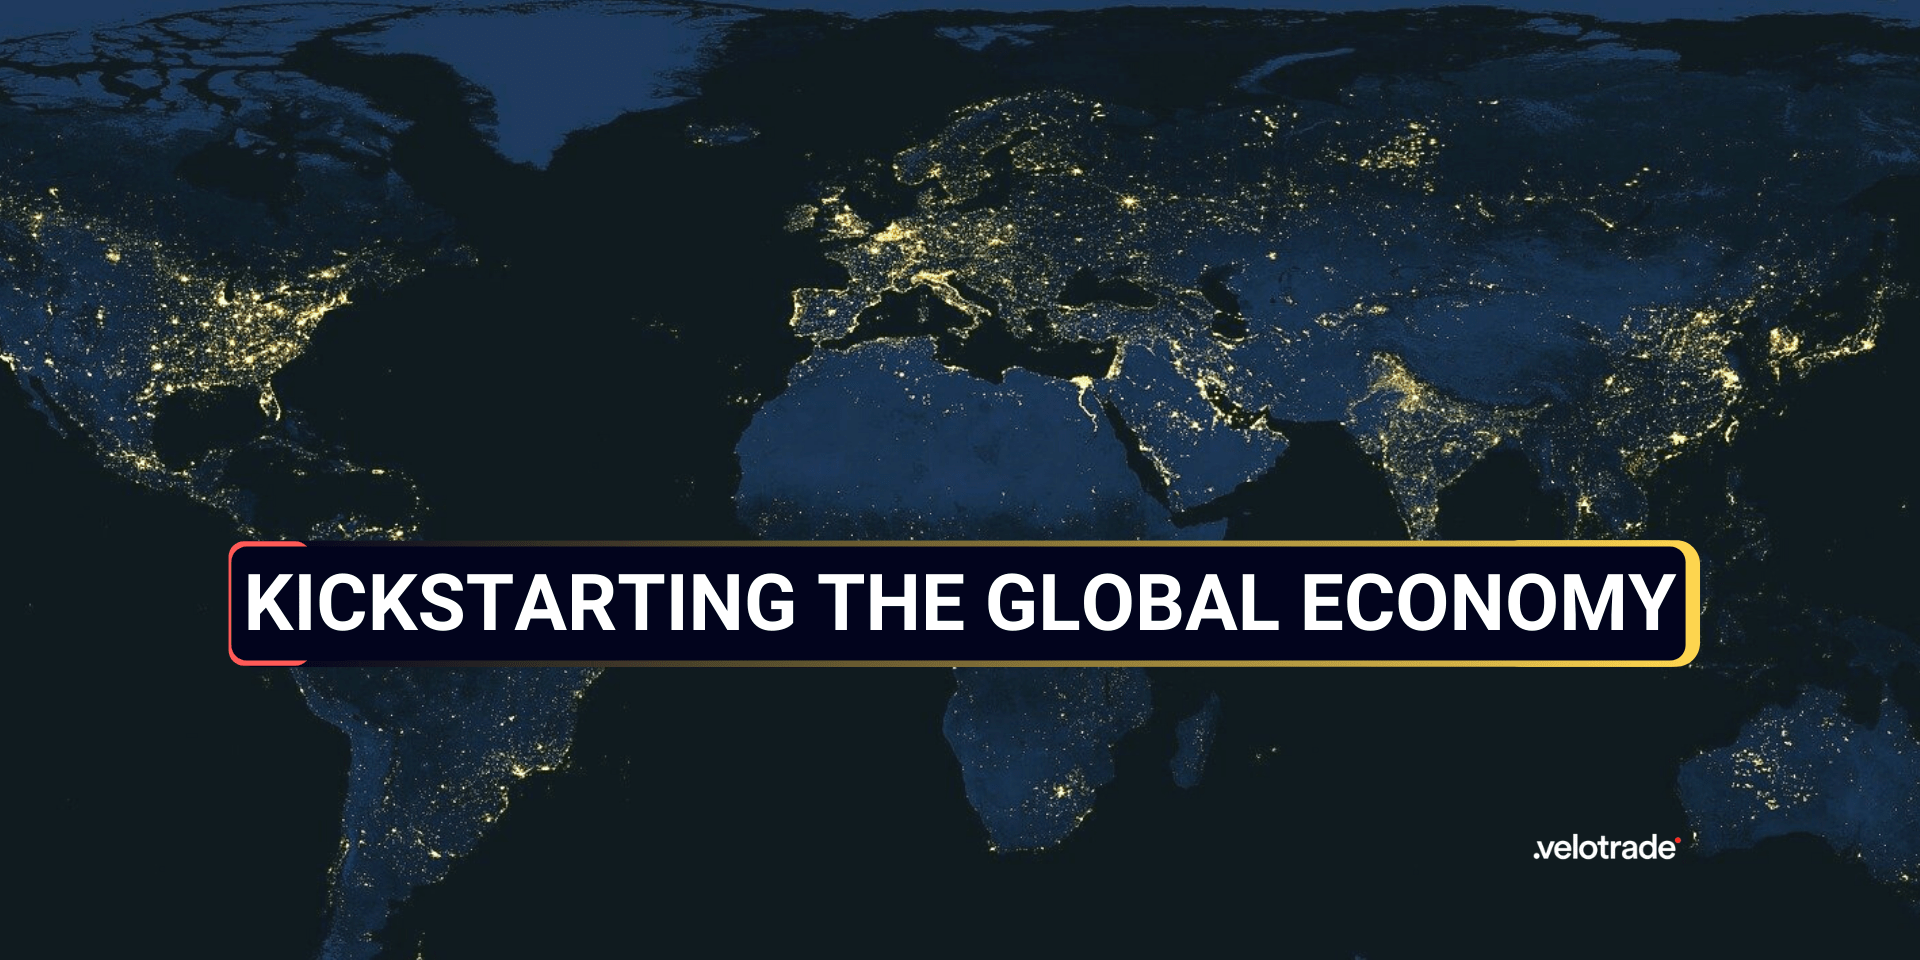 Kickstarting the global economy with a night view of the world map in the background.